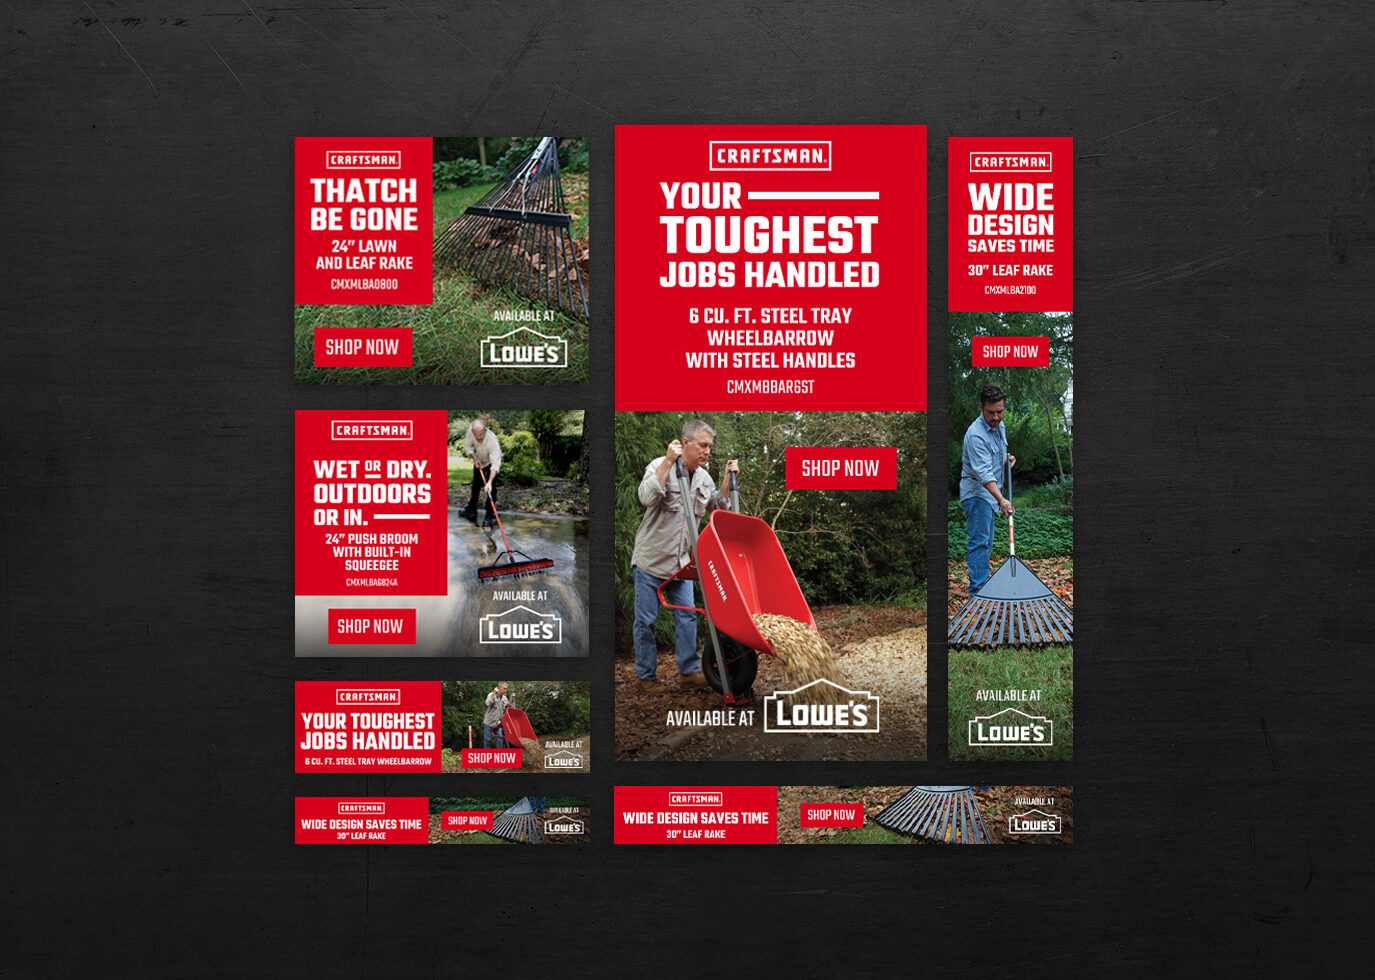 Lowes Campaign craftsman ads